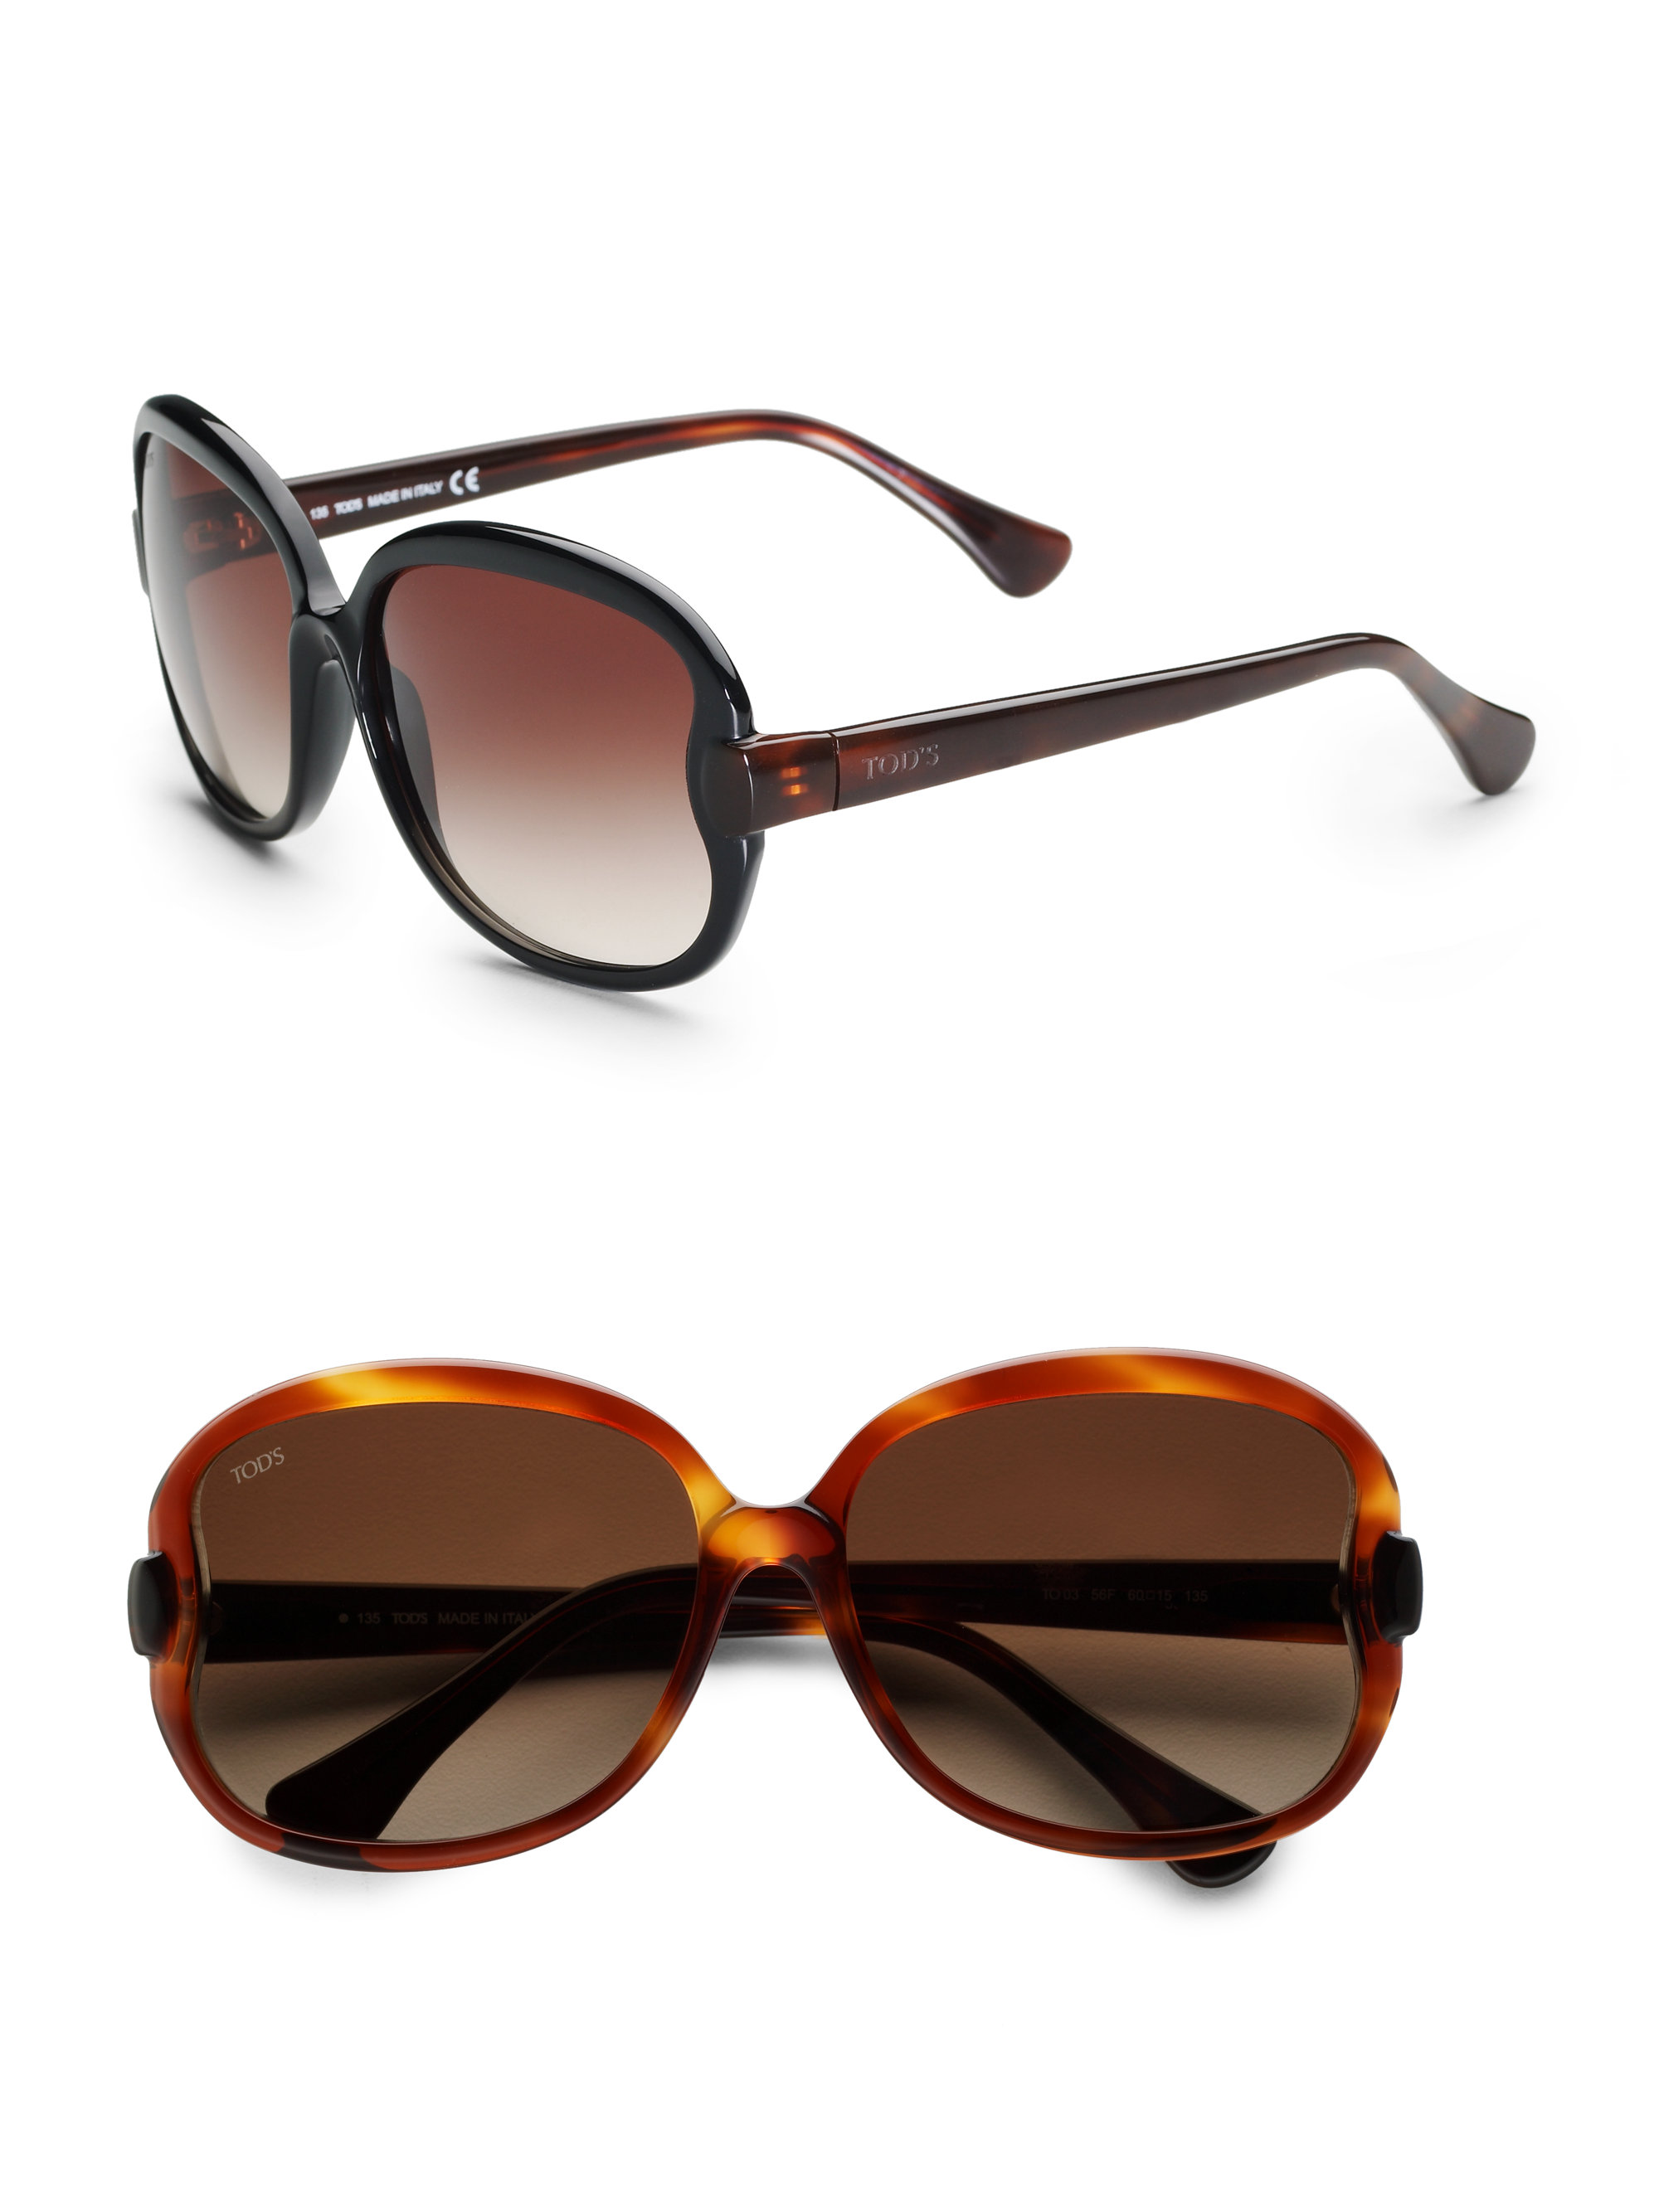 Lyst - Tod's Large Square Sunglasses in Black